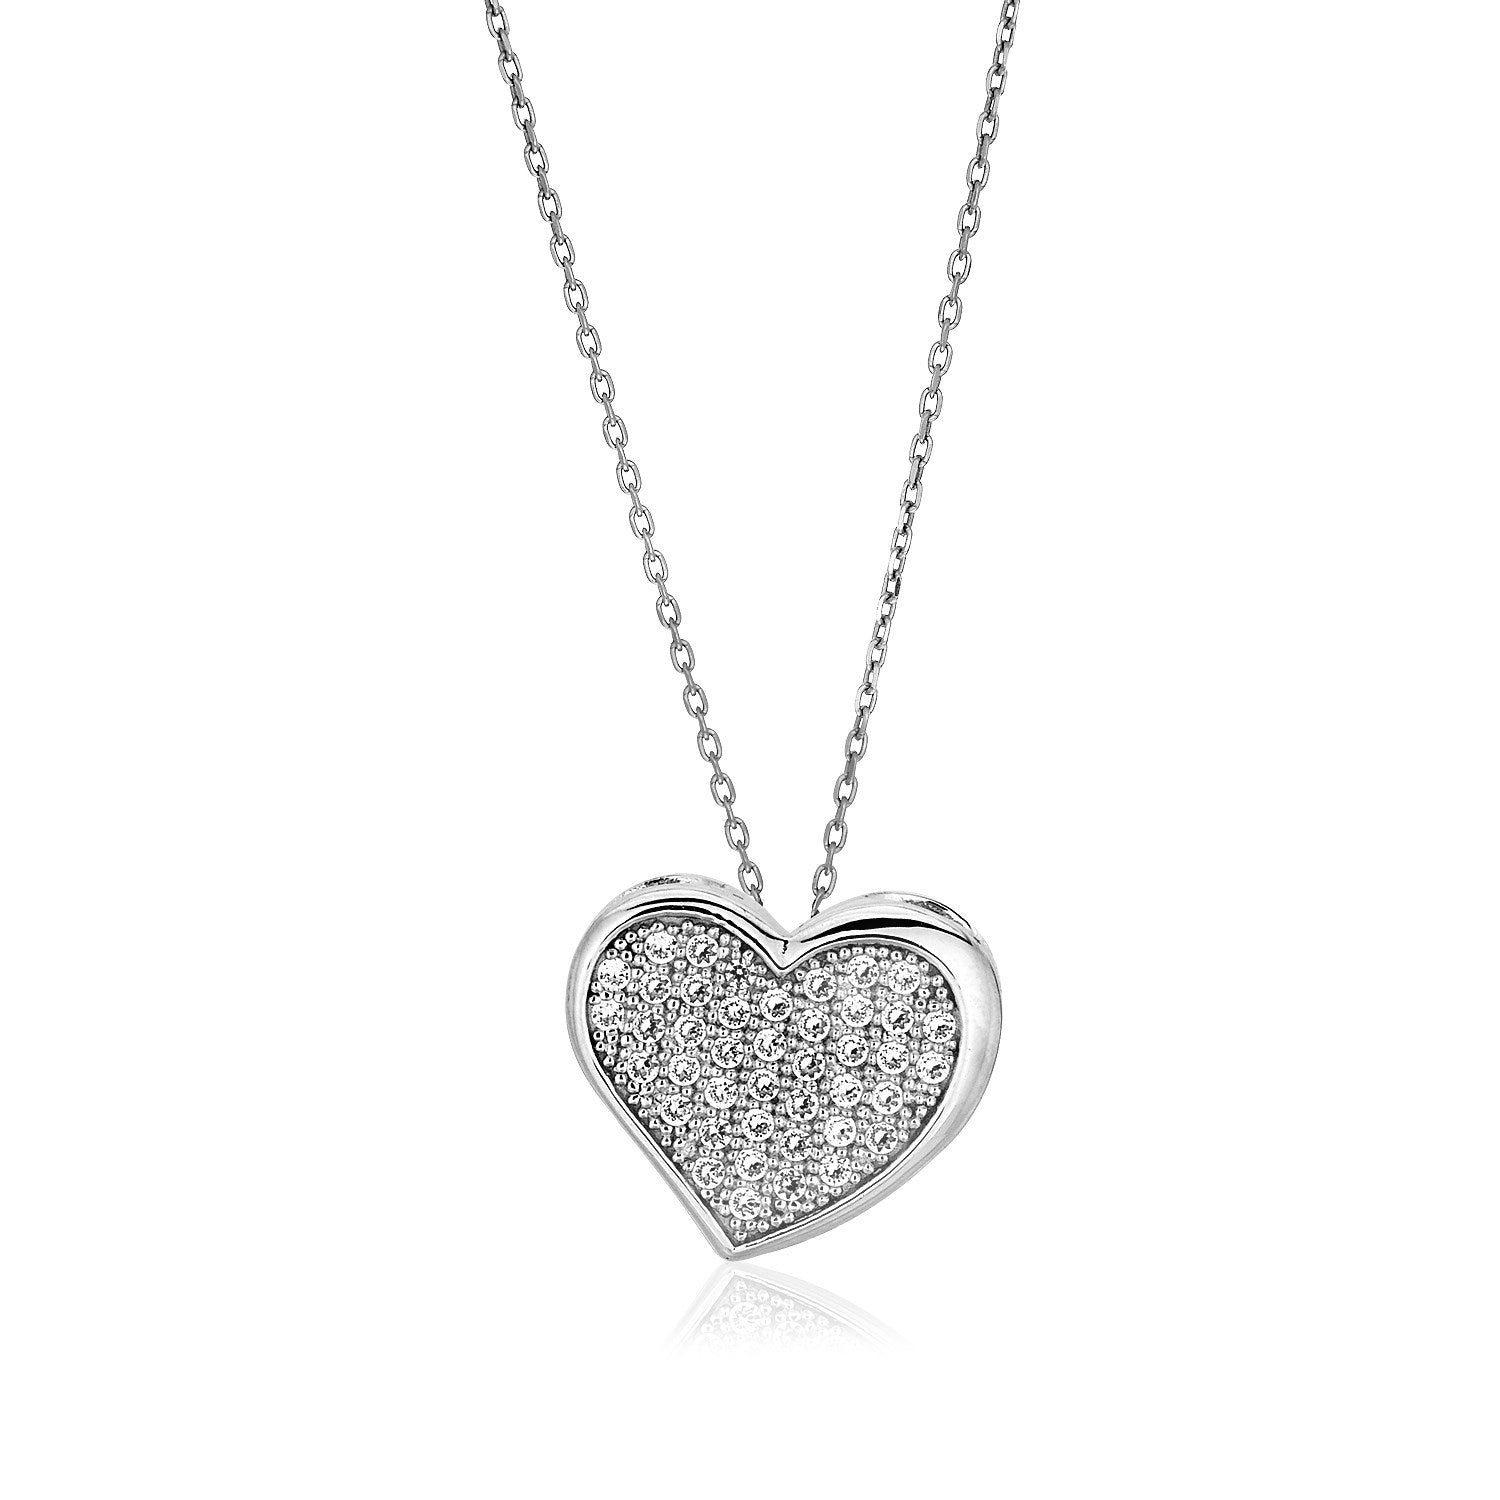 Sterling Silver Heart Necklace with Cubic Zirconias 18" ELECTRONICS by MerchMixer | BlingxAddict